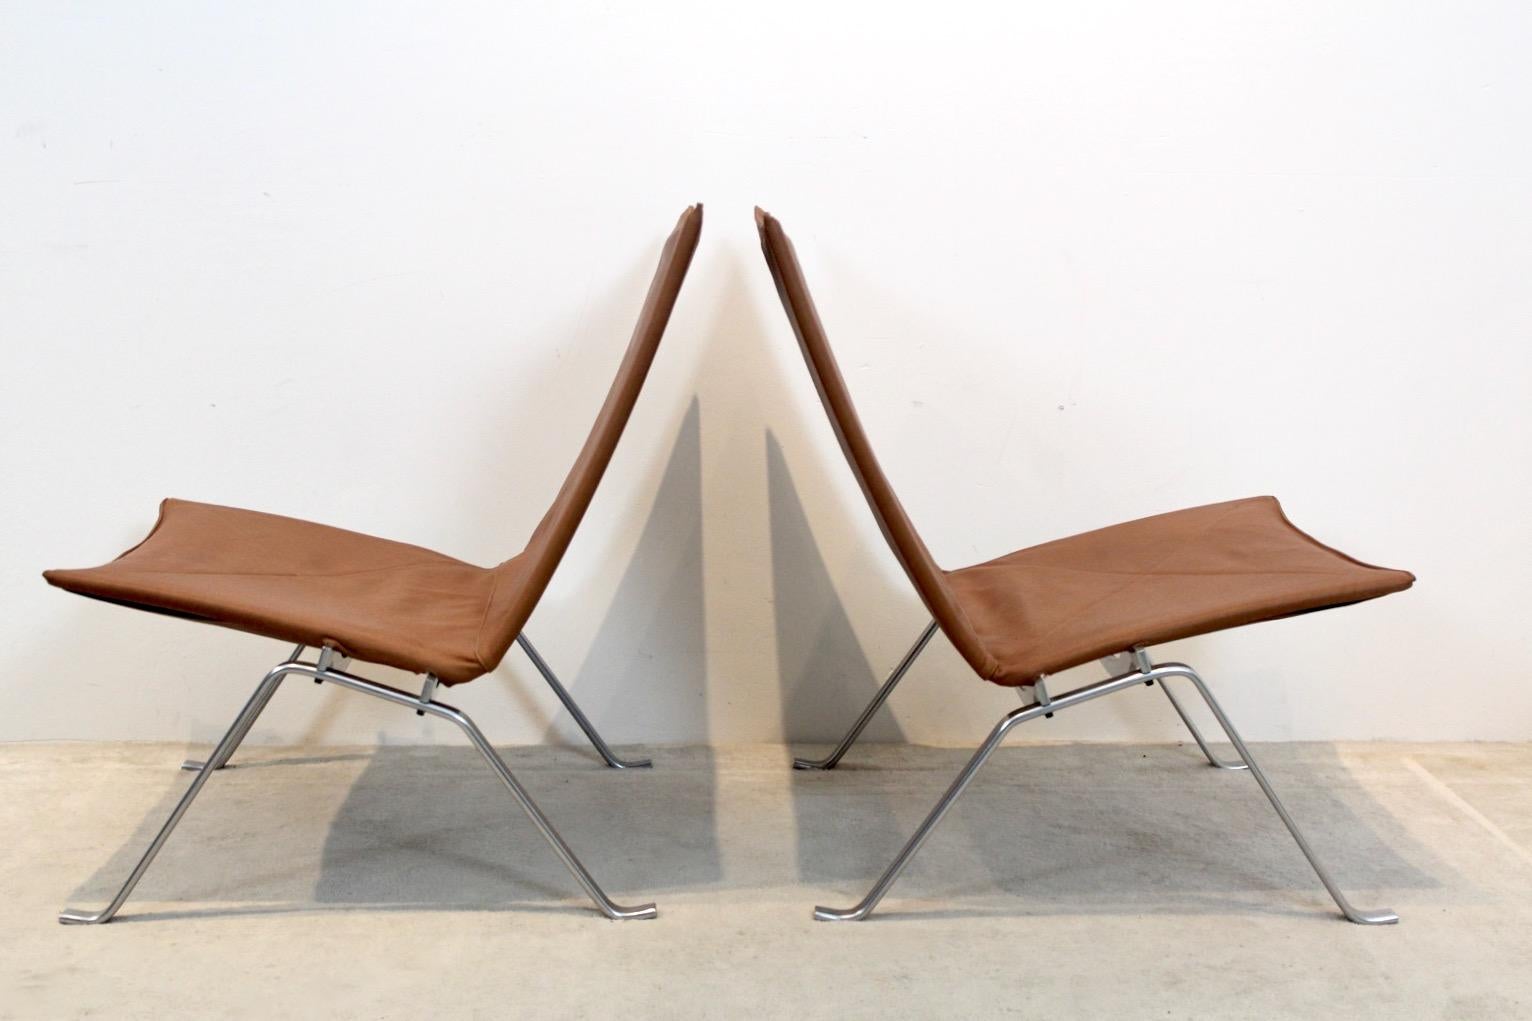 Exquisite Cognac Leather PK22 chairs by Poul Kjærholm for E. Kold Christensen For Sale 1